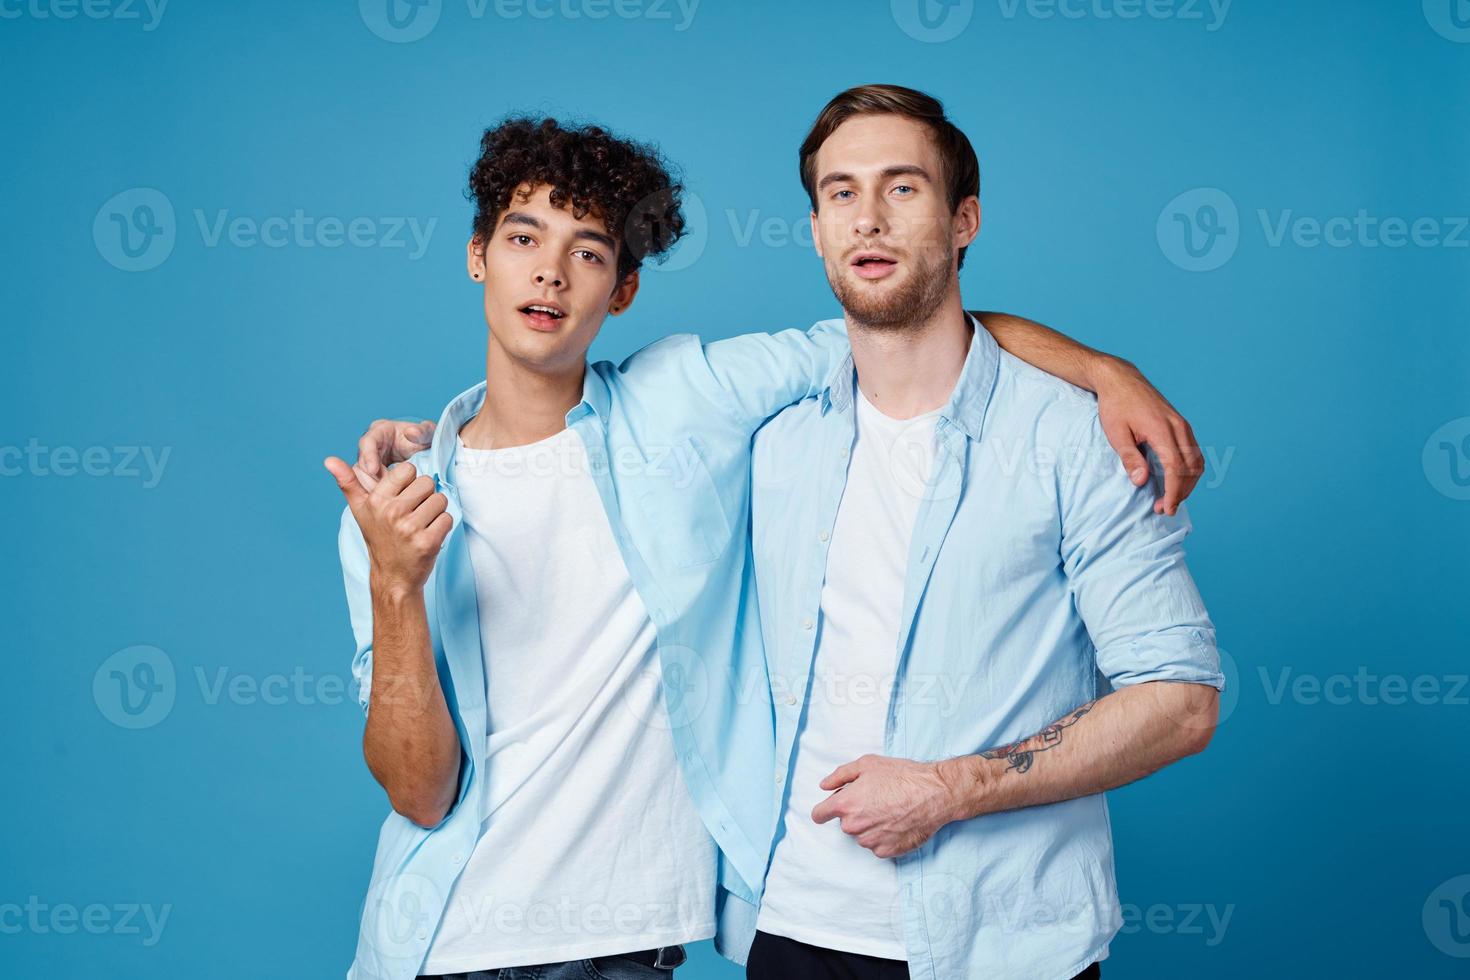 man with tattoo hugs his friend on blue background and cropped view fun photo